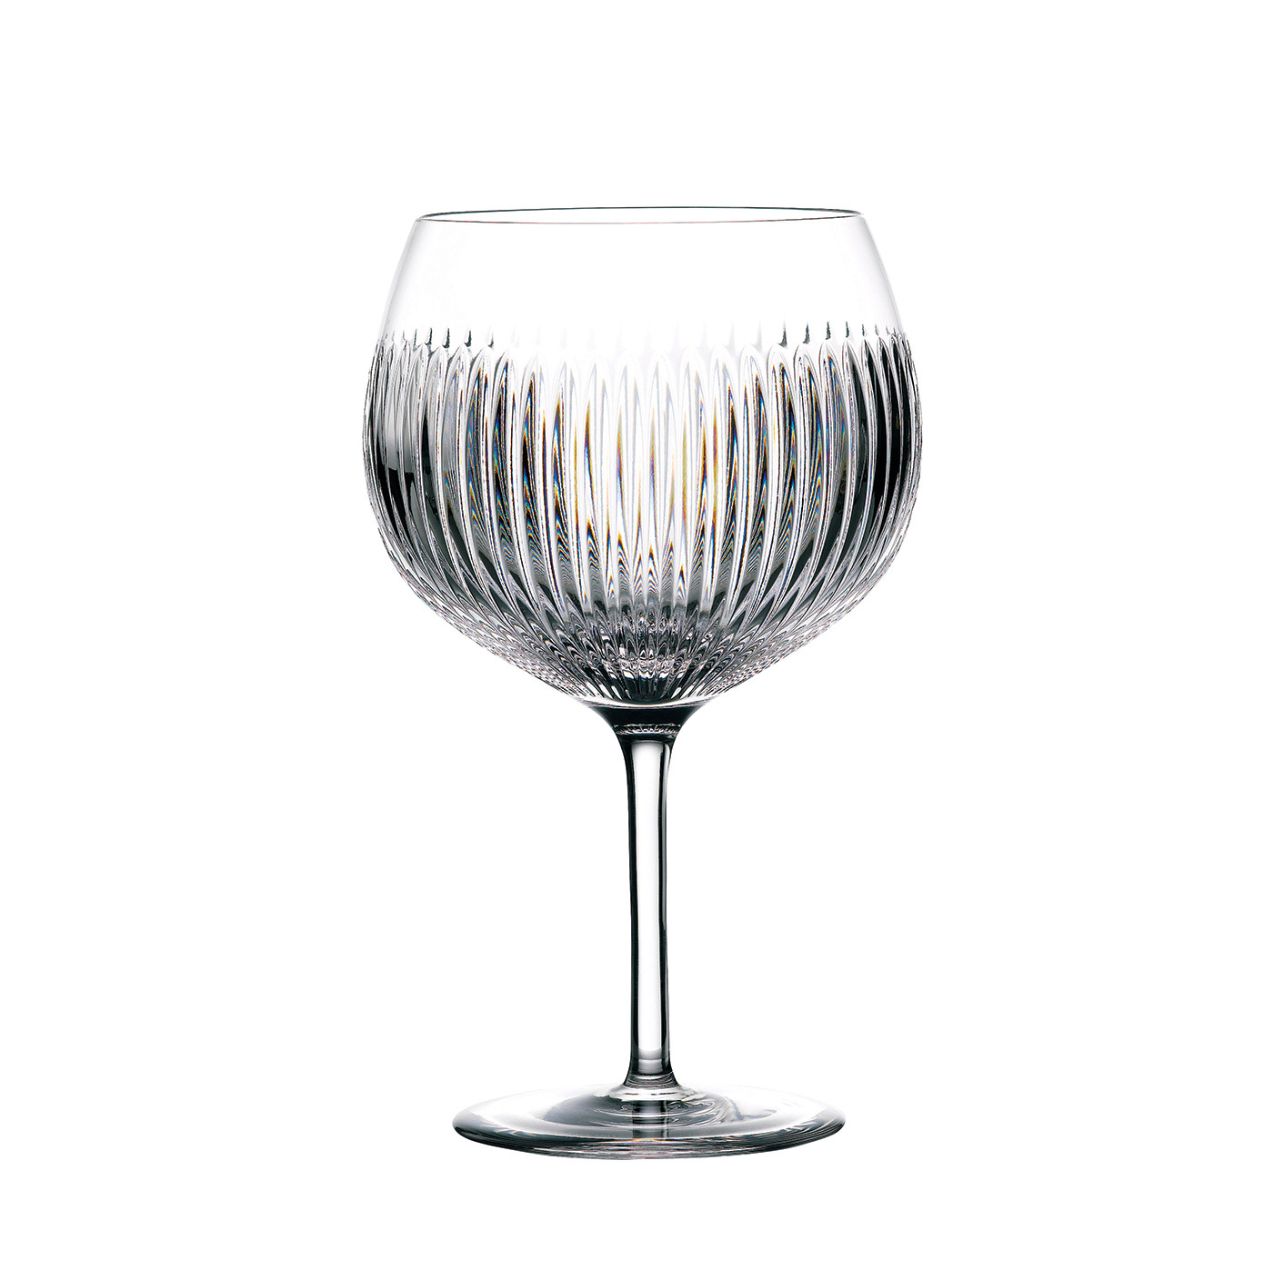 Waterford Crystal Gin Journeys Balloon Wine Glass, Set of 4  Indulge in the optimum gin experience with our striking set of four Gin Journeys Balloon Wine glasses, designed by tasting experts to enrich the aromas and botanical flavours of this iconic summer spirit. Each crystal gin balloon in this set features a delicate short stem and beautifully round bowl that traps the aromas inside the glass and allows the spirit more room to breathe - perfect for gins with a high alcohol content.